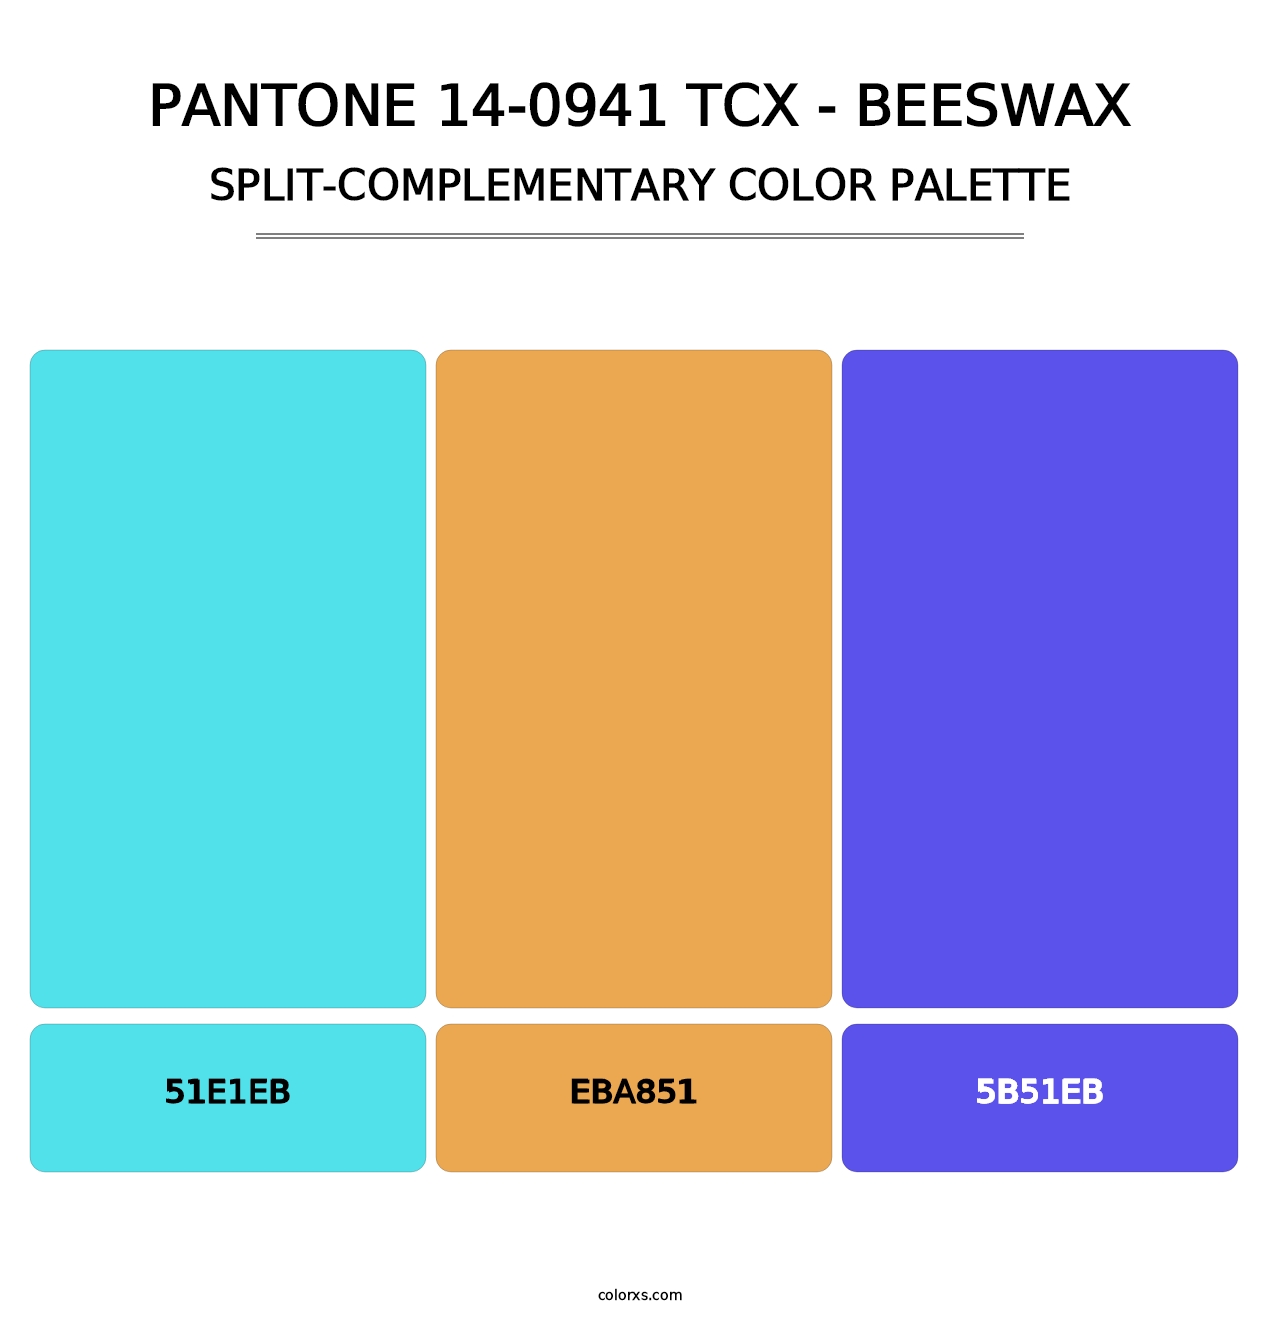 PANTONE 14-0941 TCX - Beeswax - Split-Complementary Color Palette